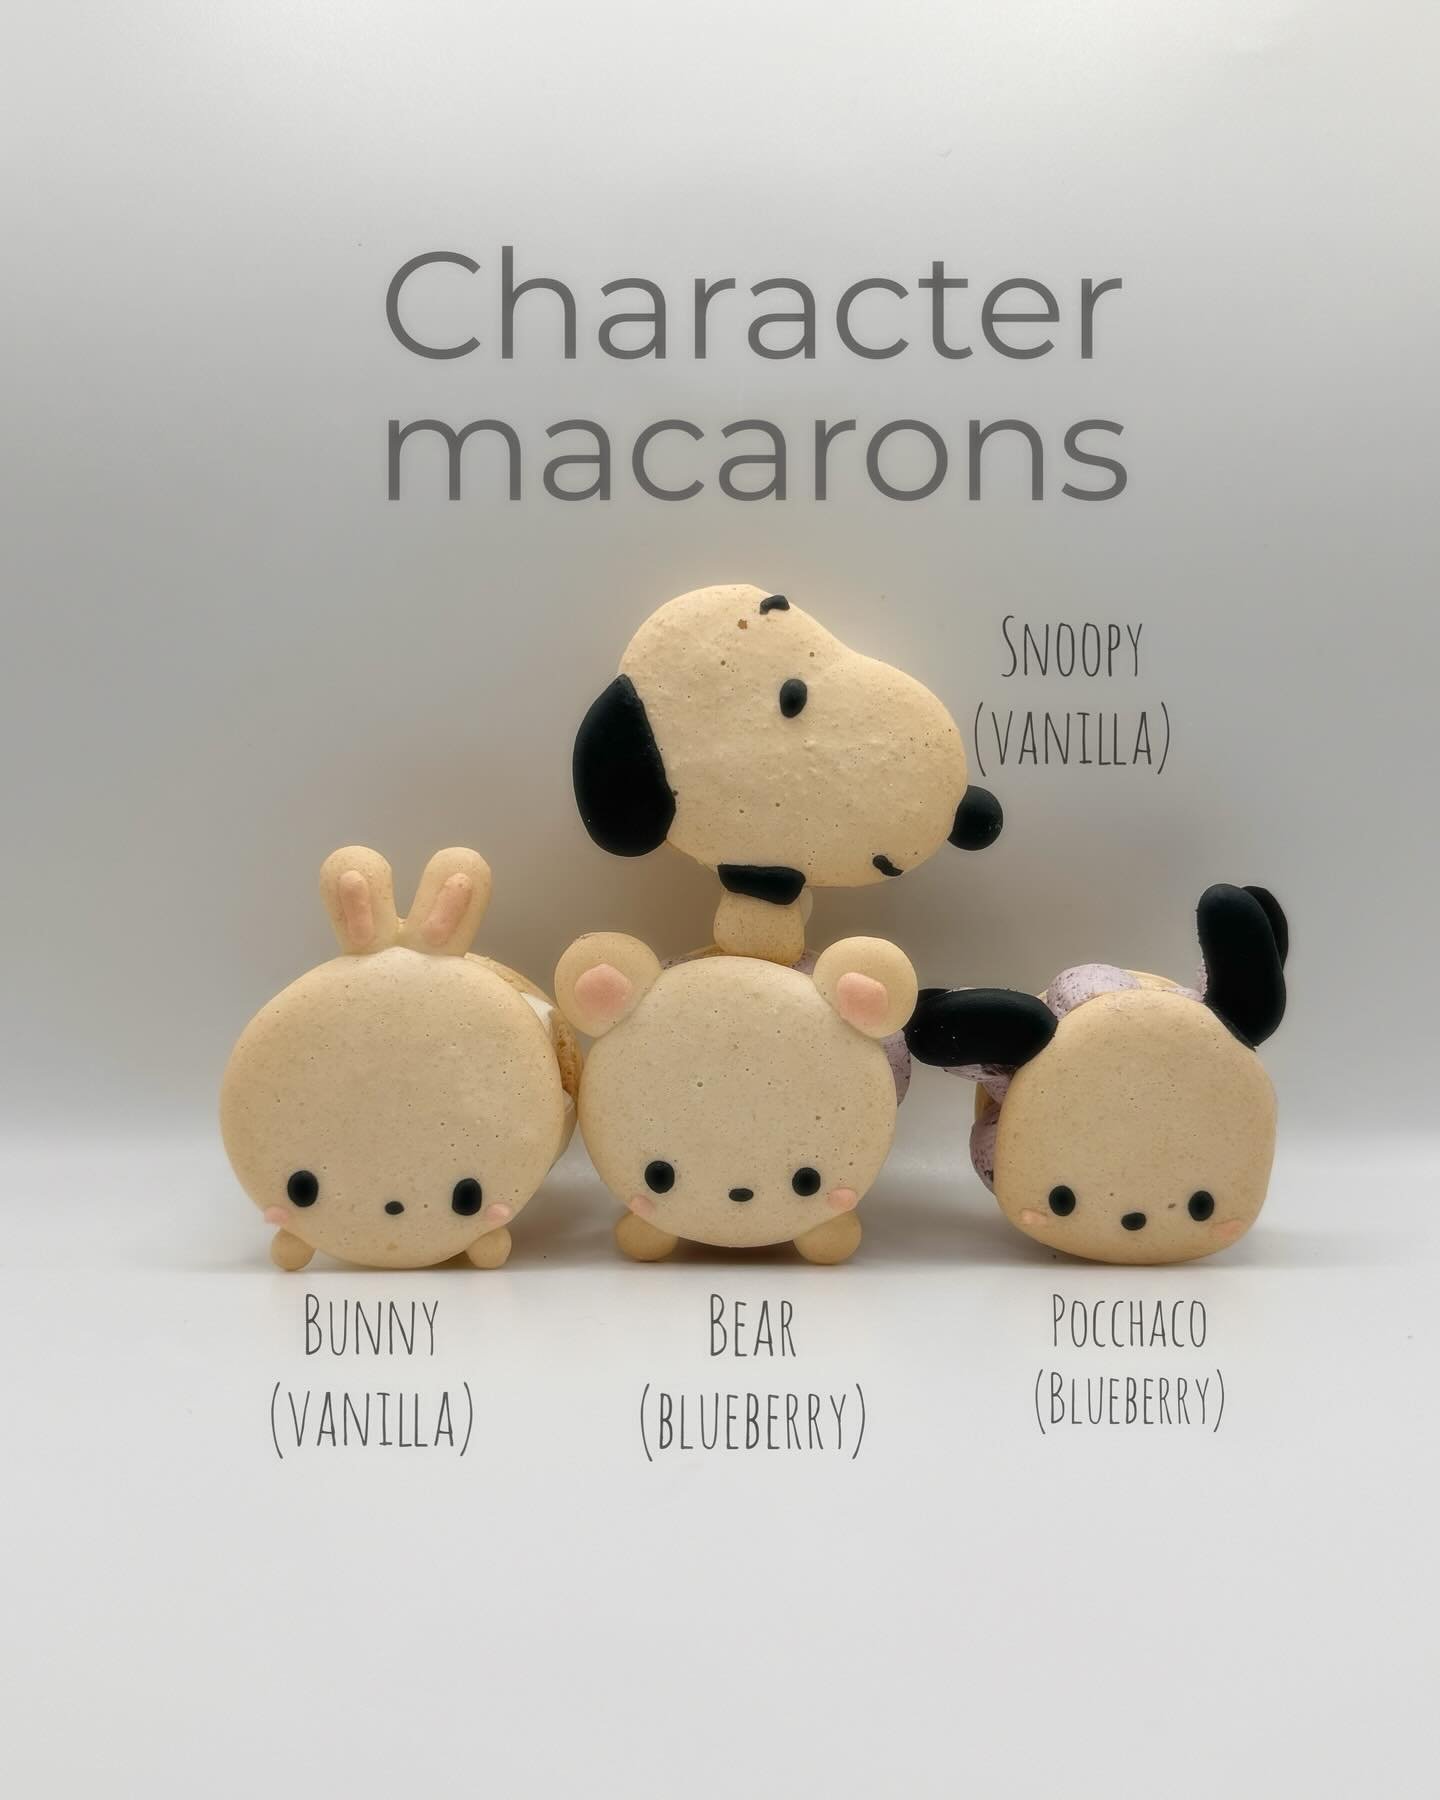 More! More! More! Which one is your favorite this week? #charactermacarons #oishiibakedgoods #sanrio #cutemacarons